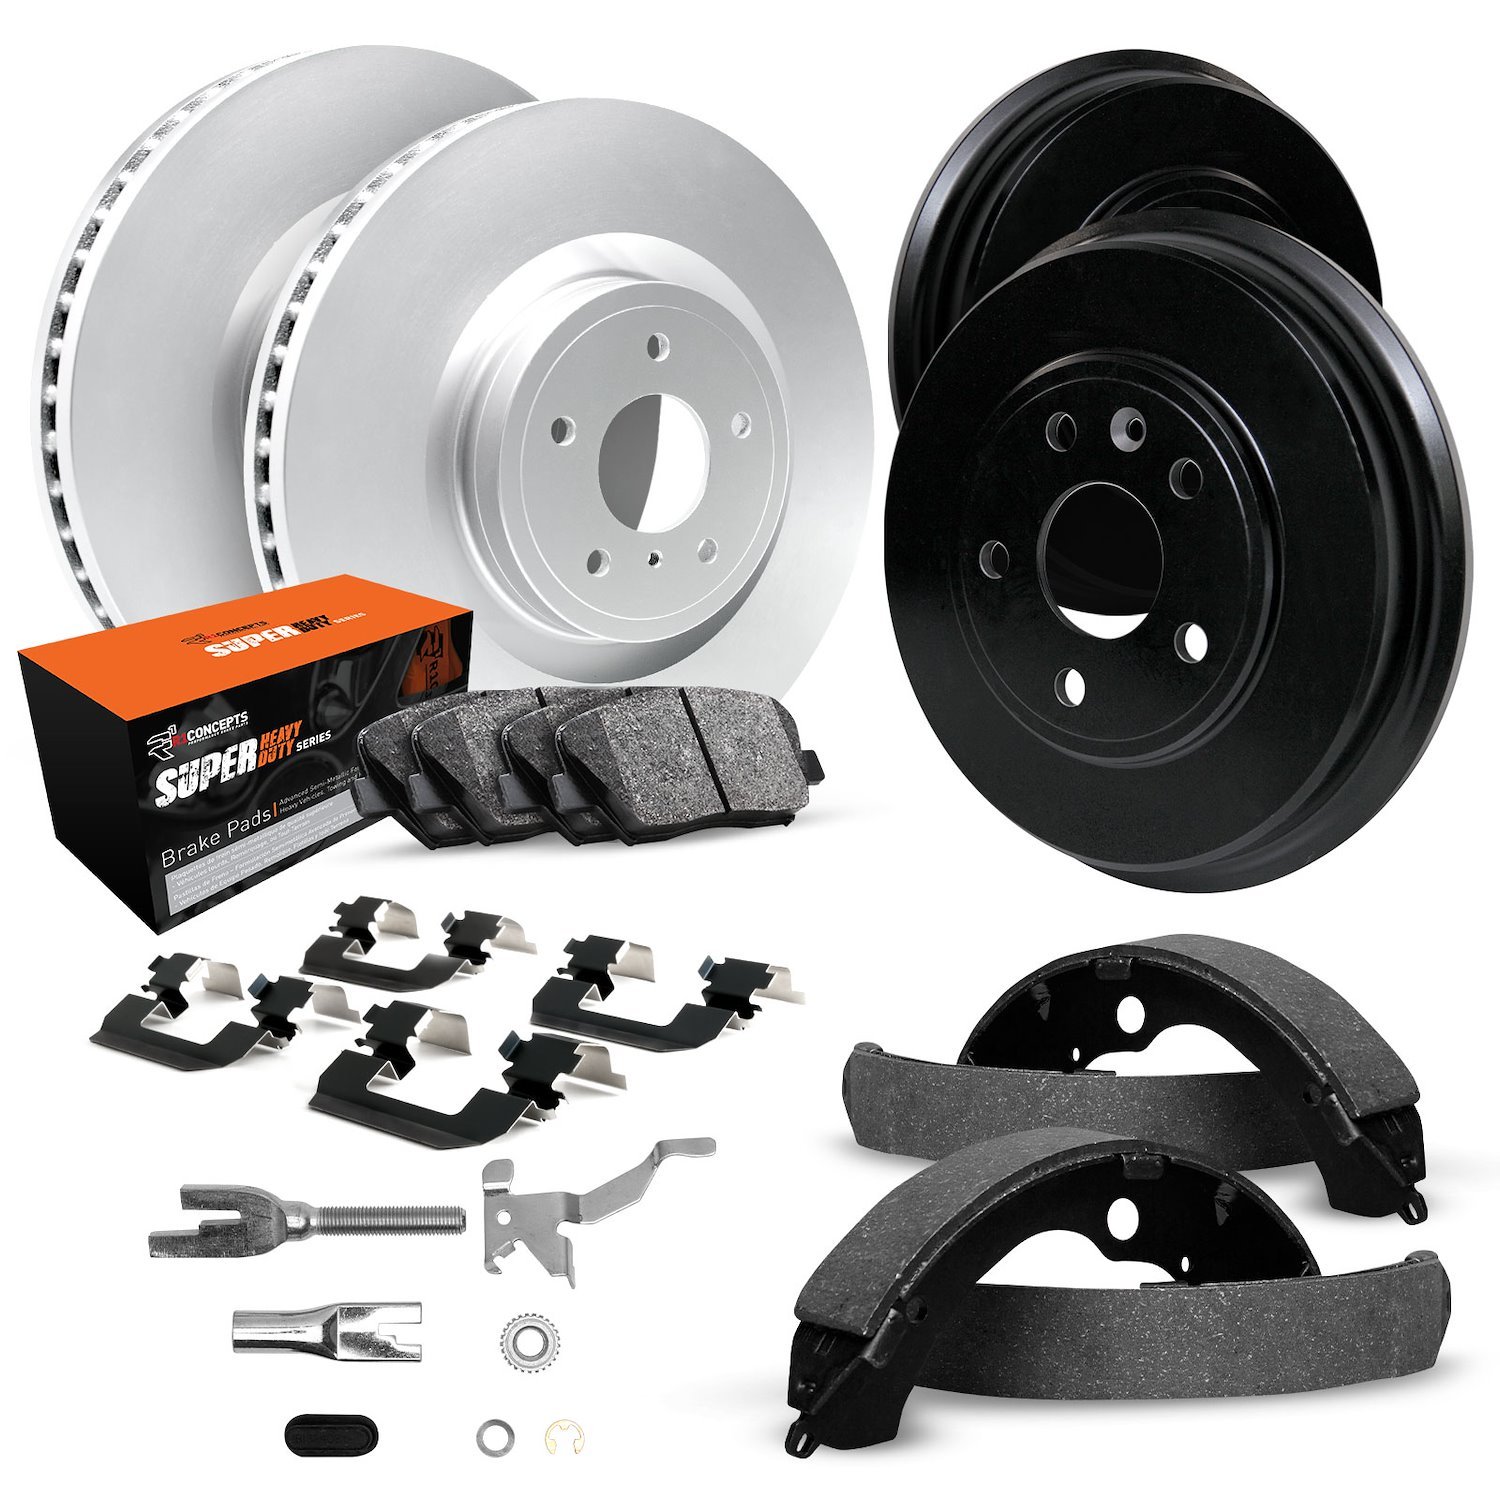 GEO-Carbon Brake Rotor & Drum Set w/Super-Duty Pads, Shoes, Hardware/Adjusters, 1969-1974 GM, Position: Front & Rear